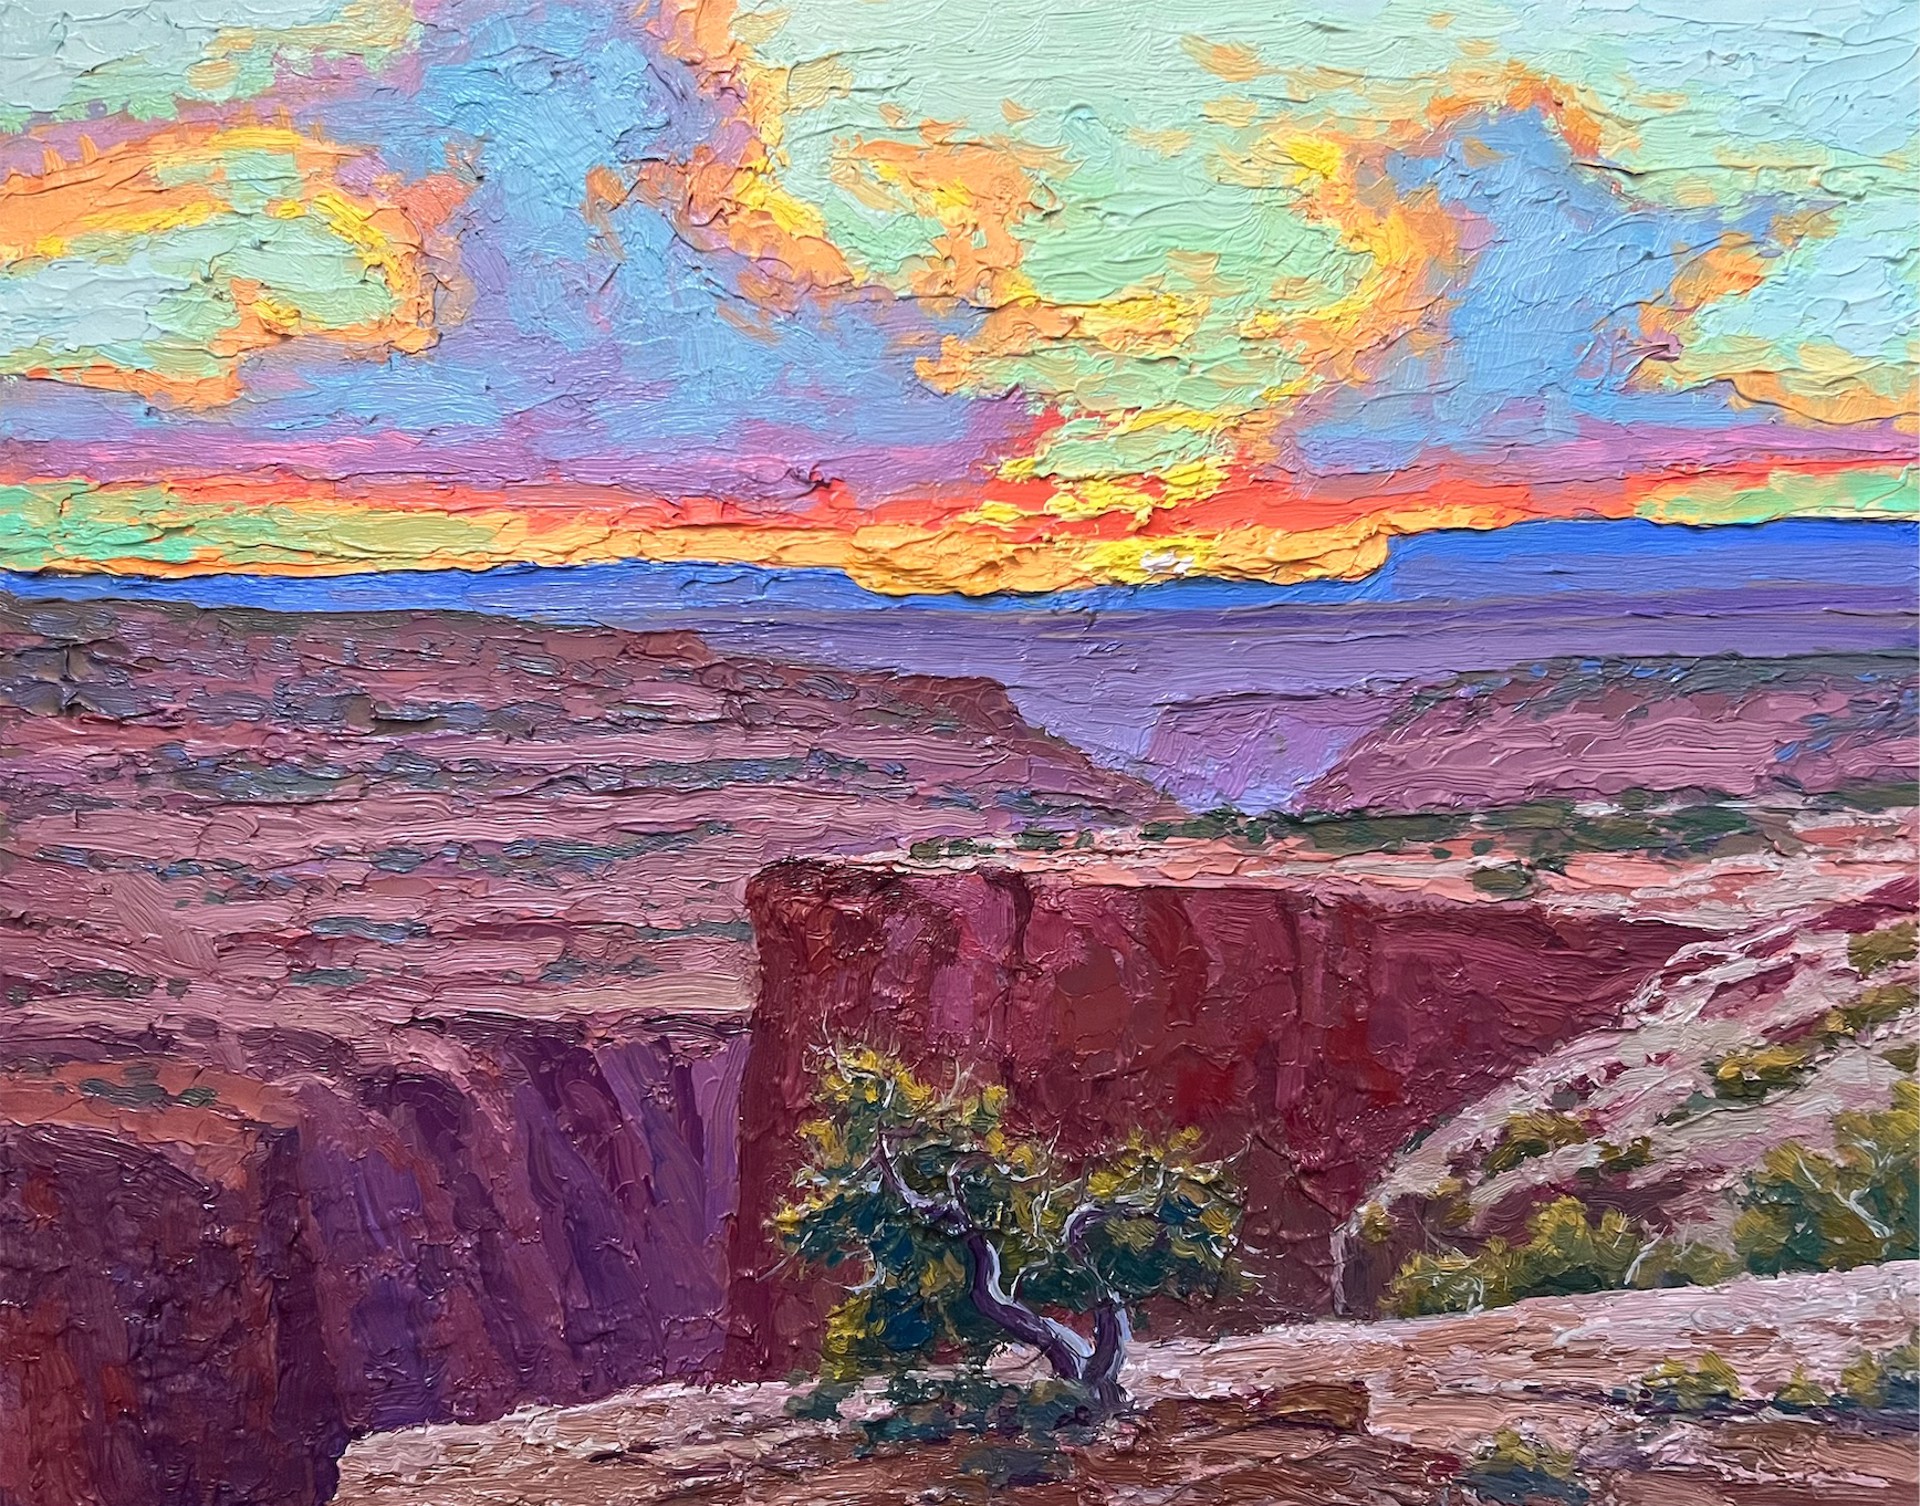 Blue Gap From Canyon de Chelly by Billyo O'Donnell